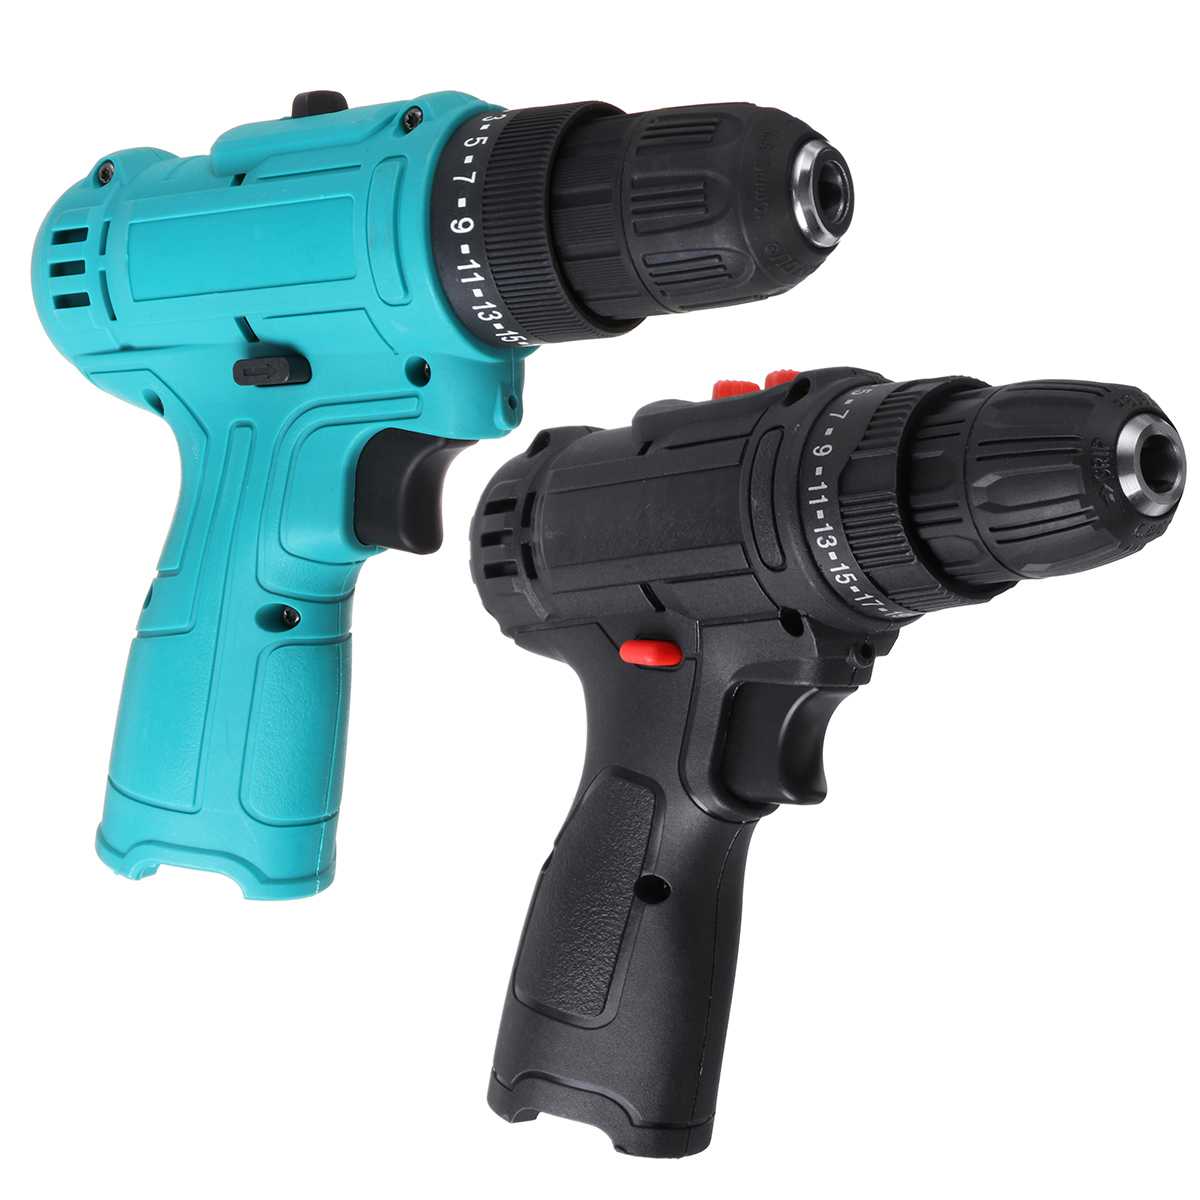 12V-25-Torque-2-Speed-Cordless-Electric-Drill-Rechargeable-Screwdriver-Without-Battery-1745656-5